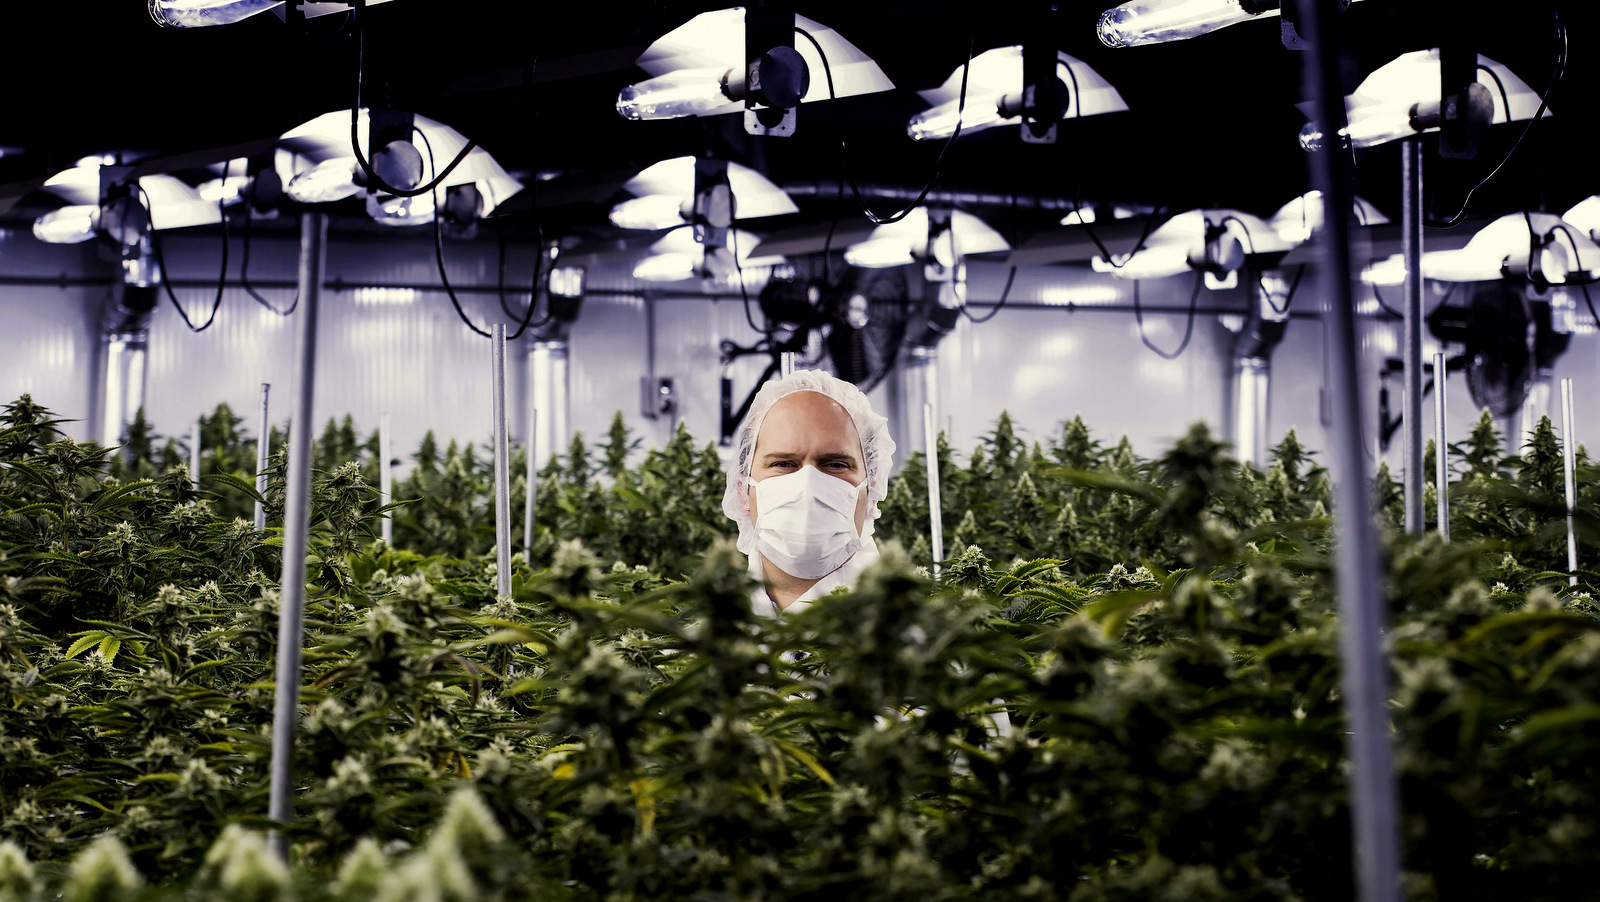 Neil Closner, MedReleaf, chief executive officer poses for photographs at the growing facility in Markham, Ontario